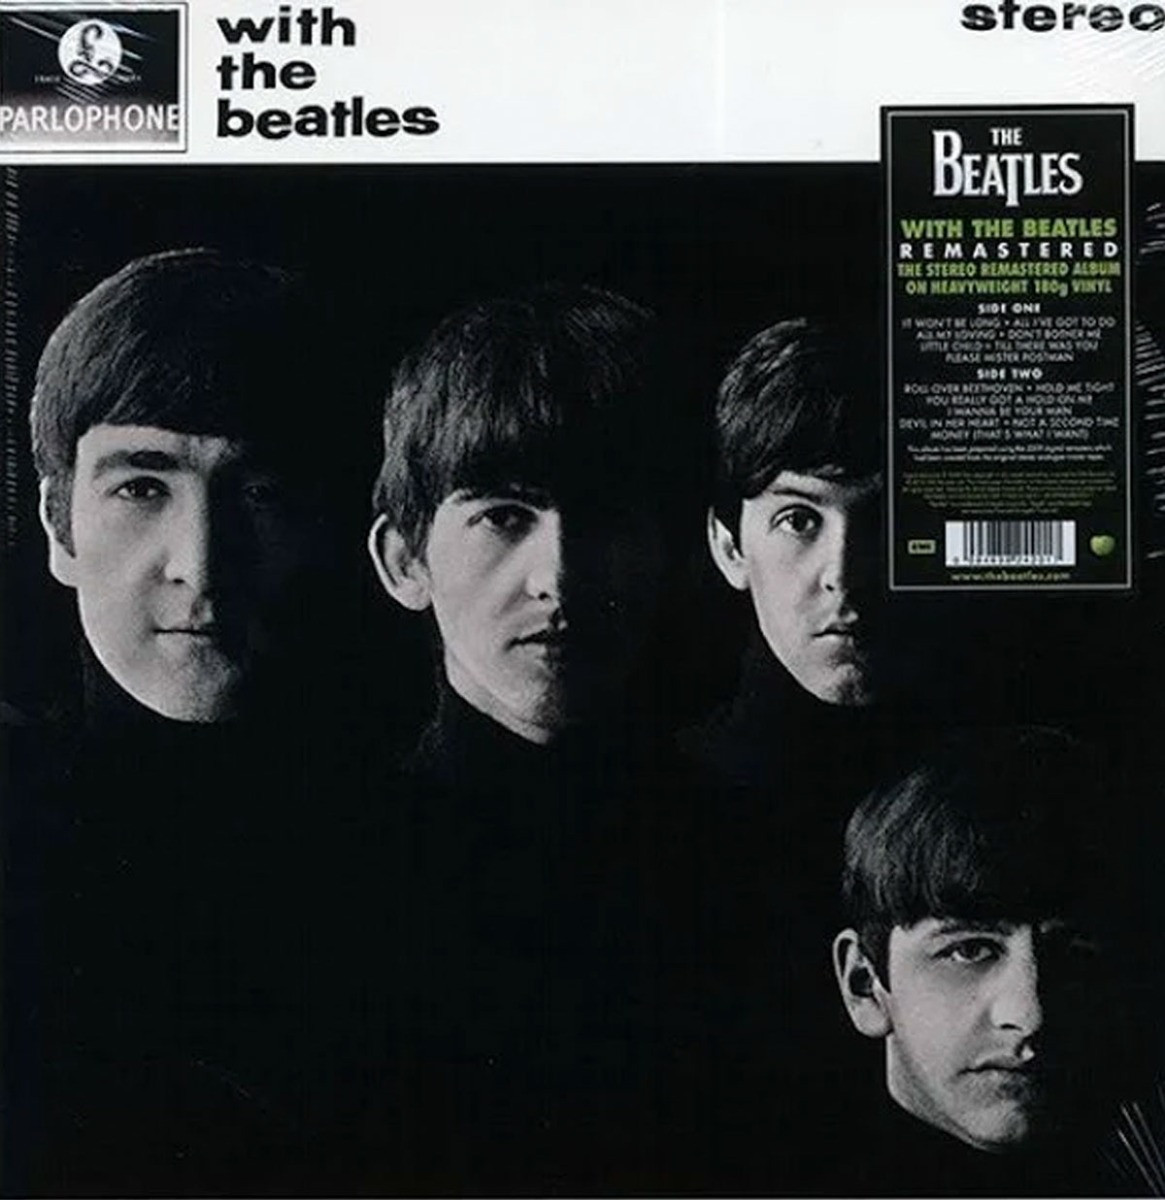 The Beatles - With The Beatles LP